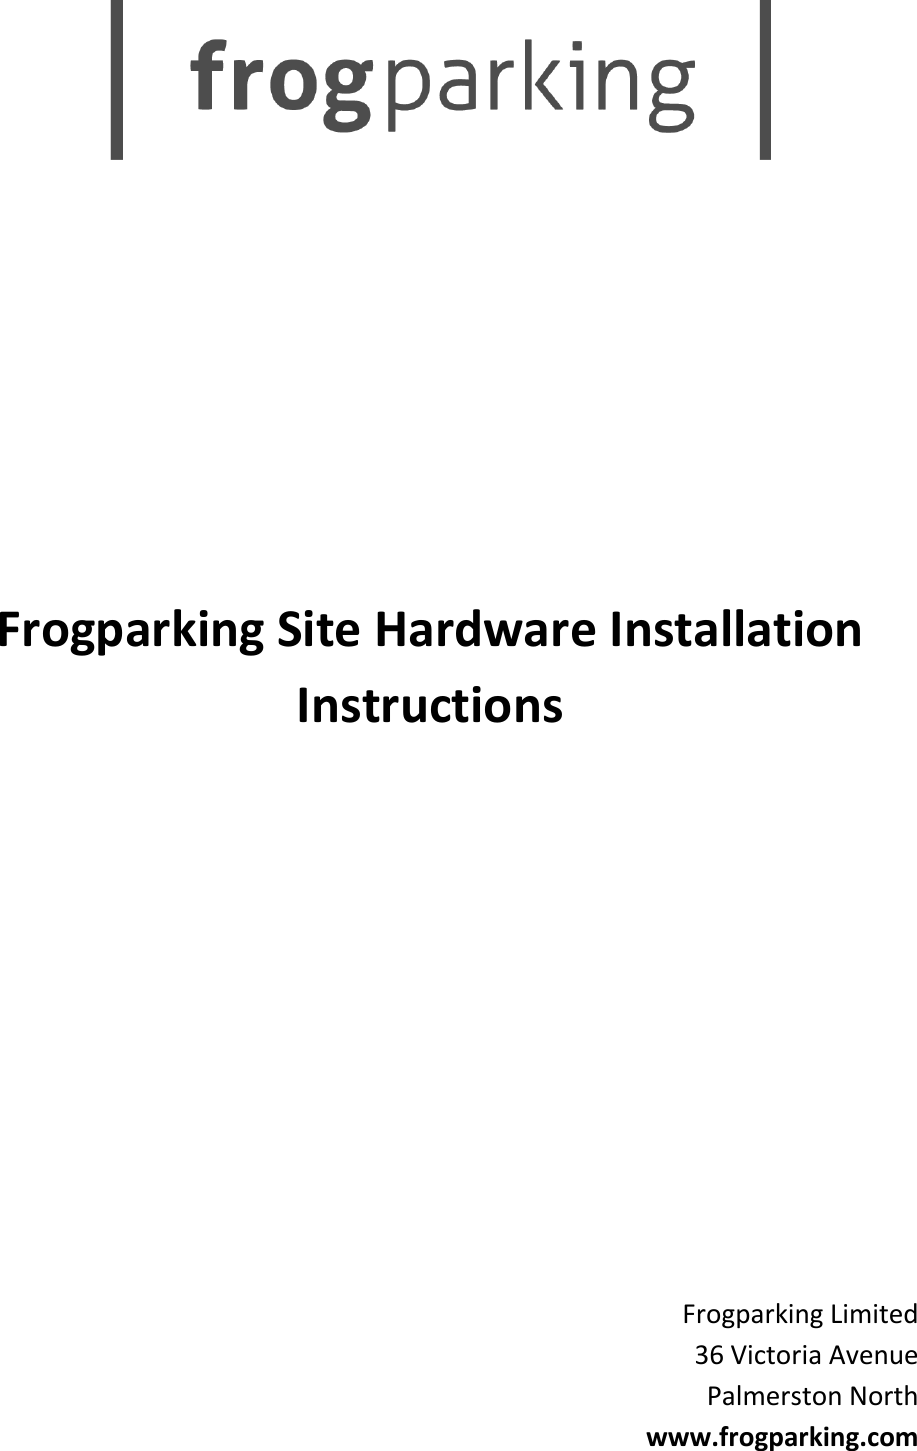            Frogparking Site Hardware Installation Instructions           Frogparking Limited 36 Victoria Avenue Palmerston North www.frogparking.com    